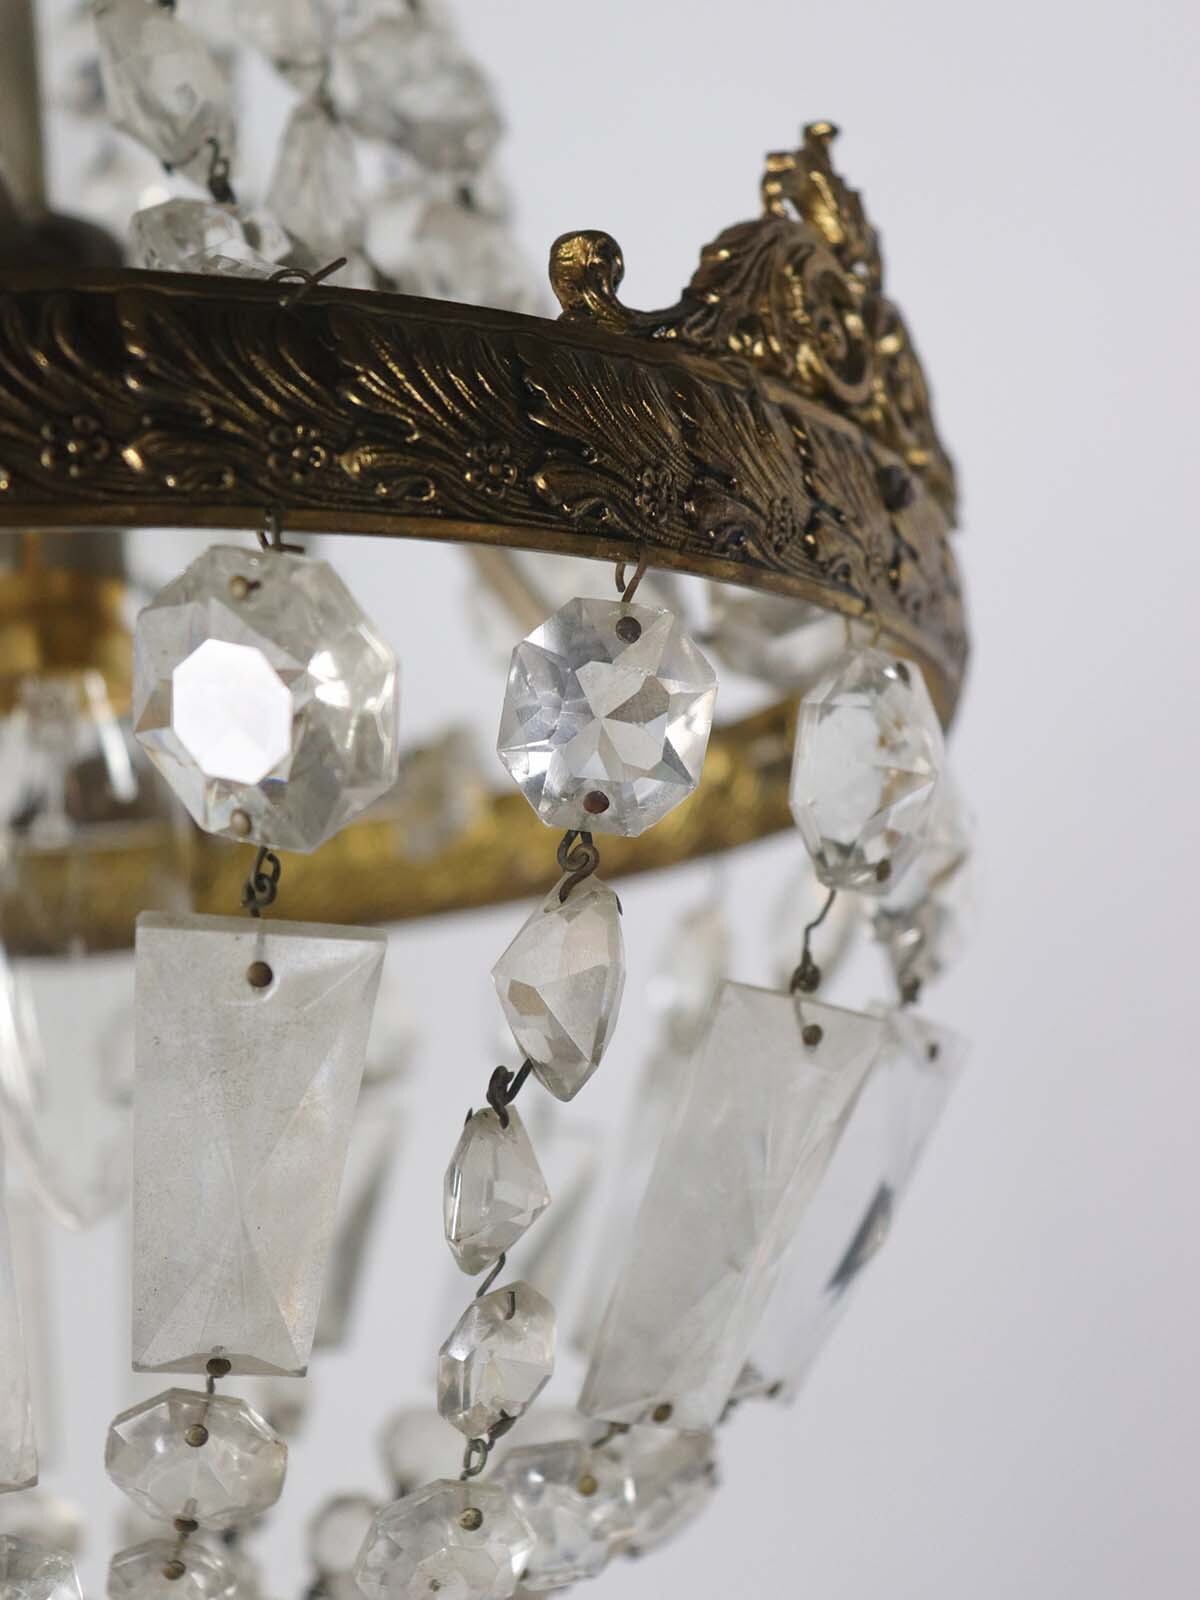 1930's,crystal chandelier,brass,empire style,france